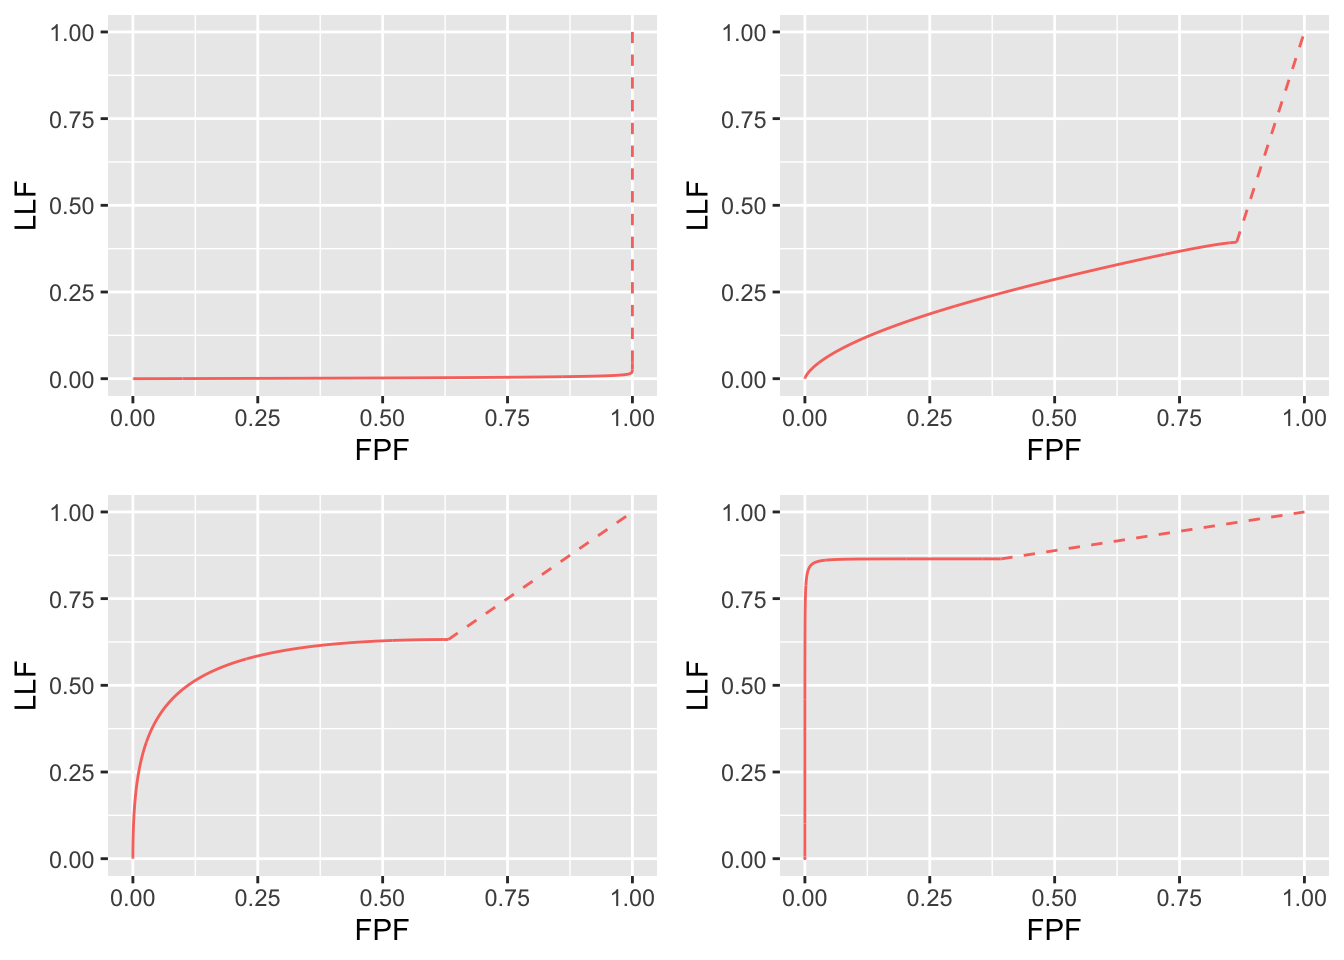 RSM-predicted AFROC curves using intrinsic parameters $\lambda_i = 2$ and $\nu_i = 0.5$. Top left: $\mu = 0.1$; Top right: $\mu = 1$; Bottom left: $\mu = 2$; Bottom right: $\mu = 4$. Each curve includes an inaccessible dashed linear extension from the end-point to (1,1). Each plot is contained within the unit square and its AUC is a valid figure of merit.